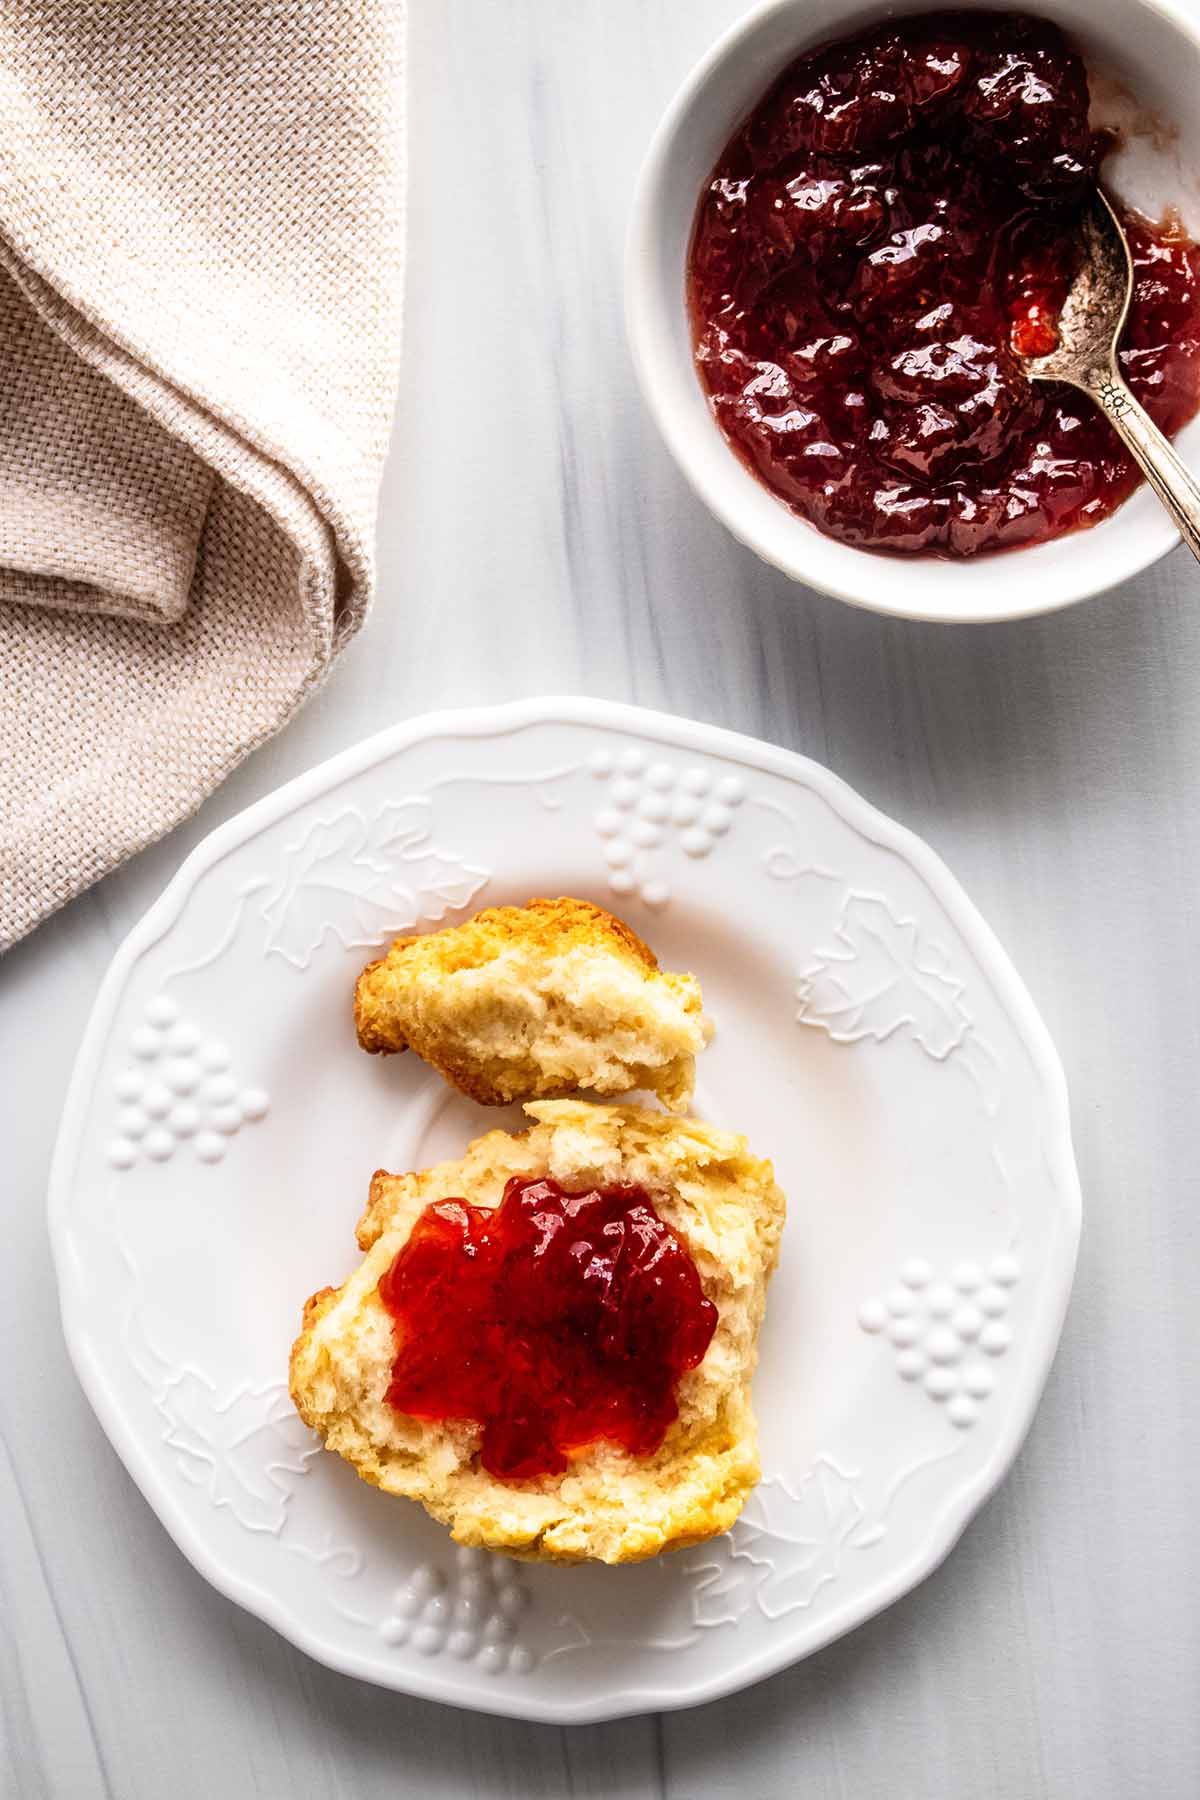 Half a biscuit topped with strawberry jam on a white plate with a small bowl of strawberry jam.